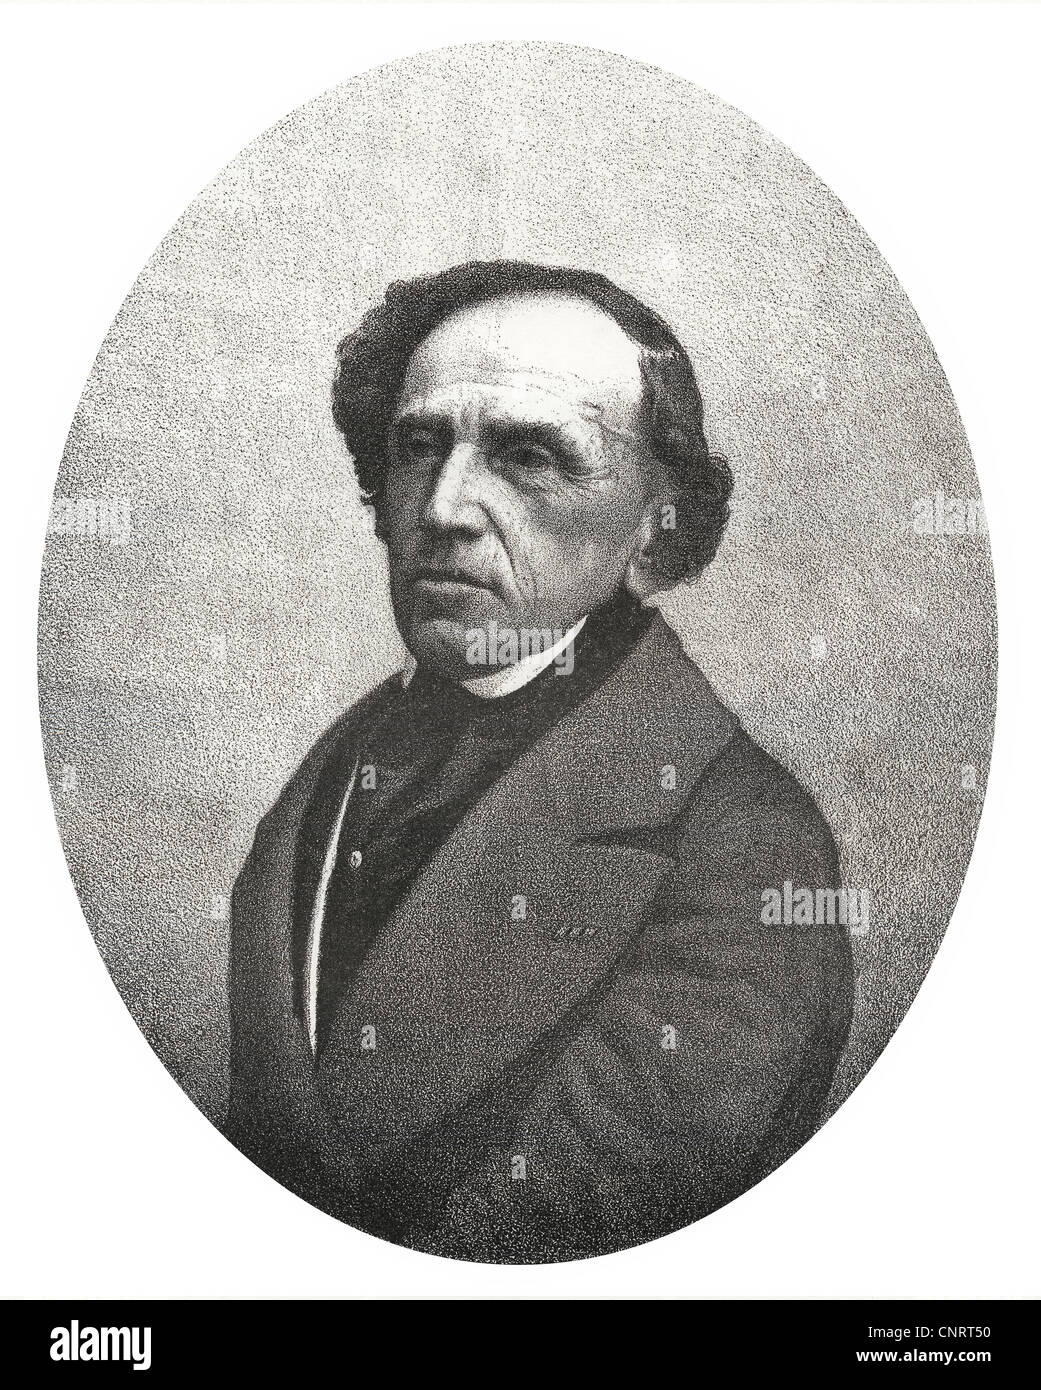 Giacomo Meyerbeer or Jakob Liebmann Meyer Beer, 1791 - 1864, a German composer and conductor, Stock Photo